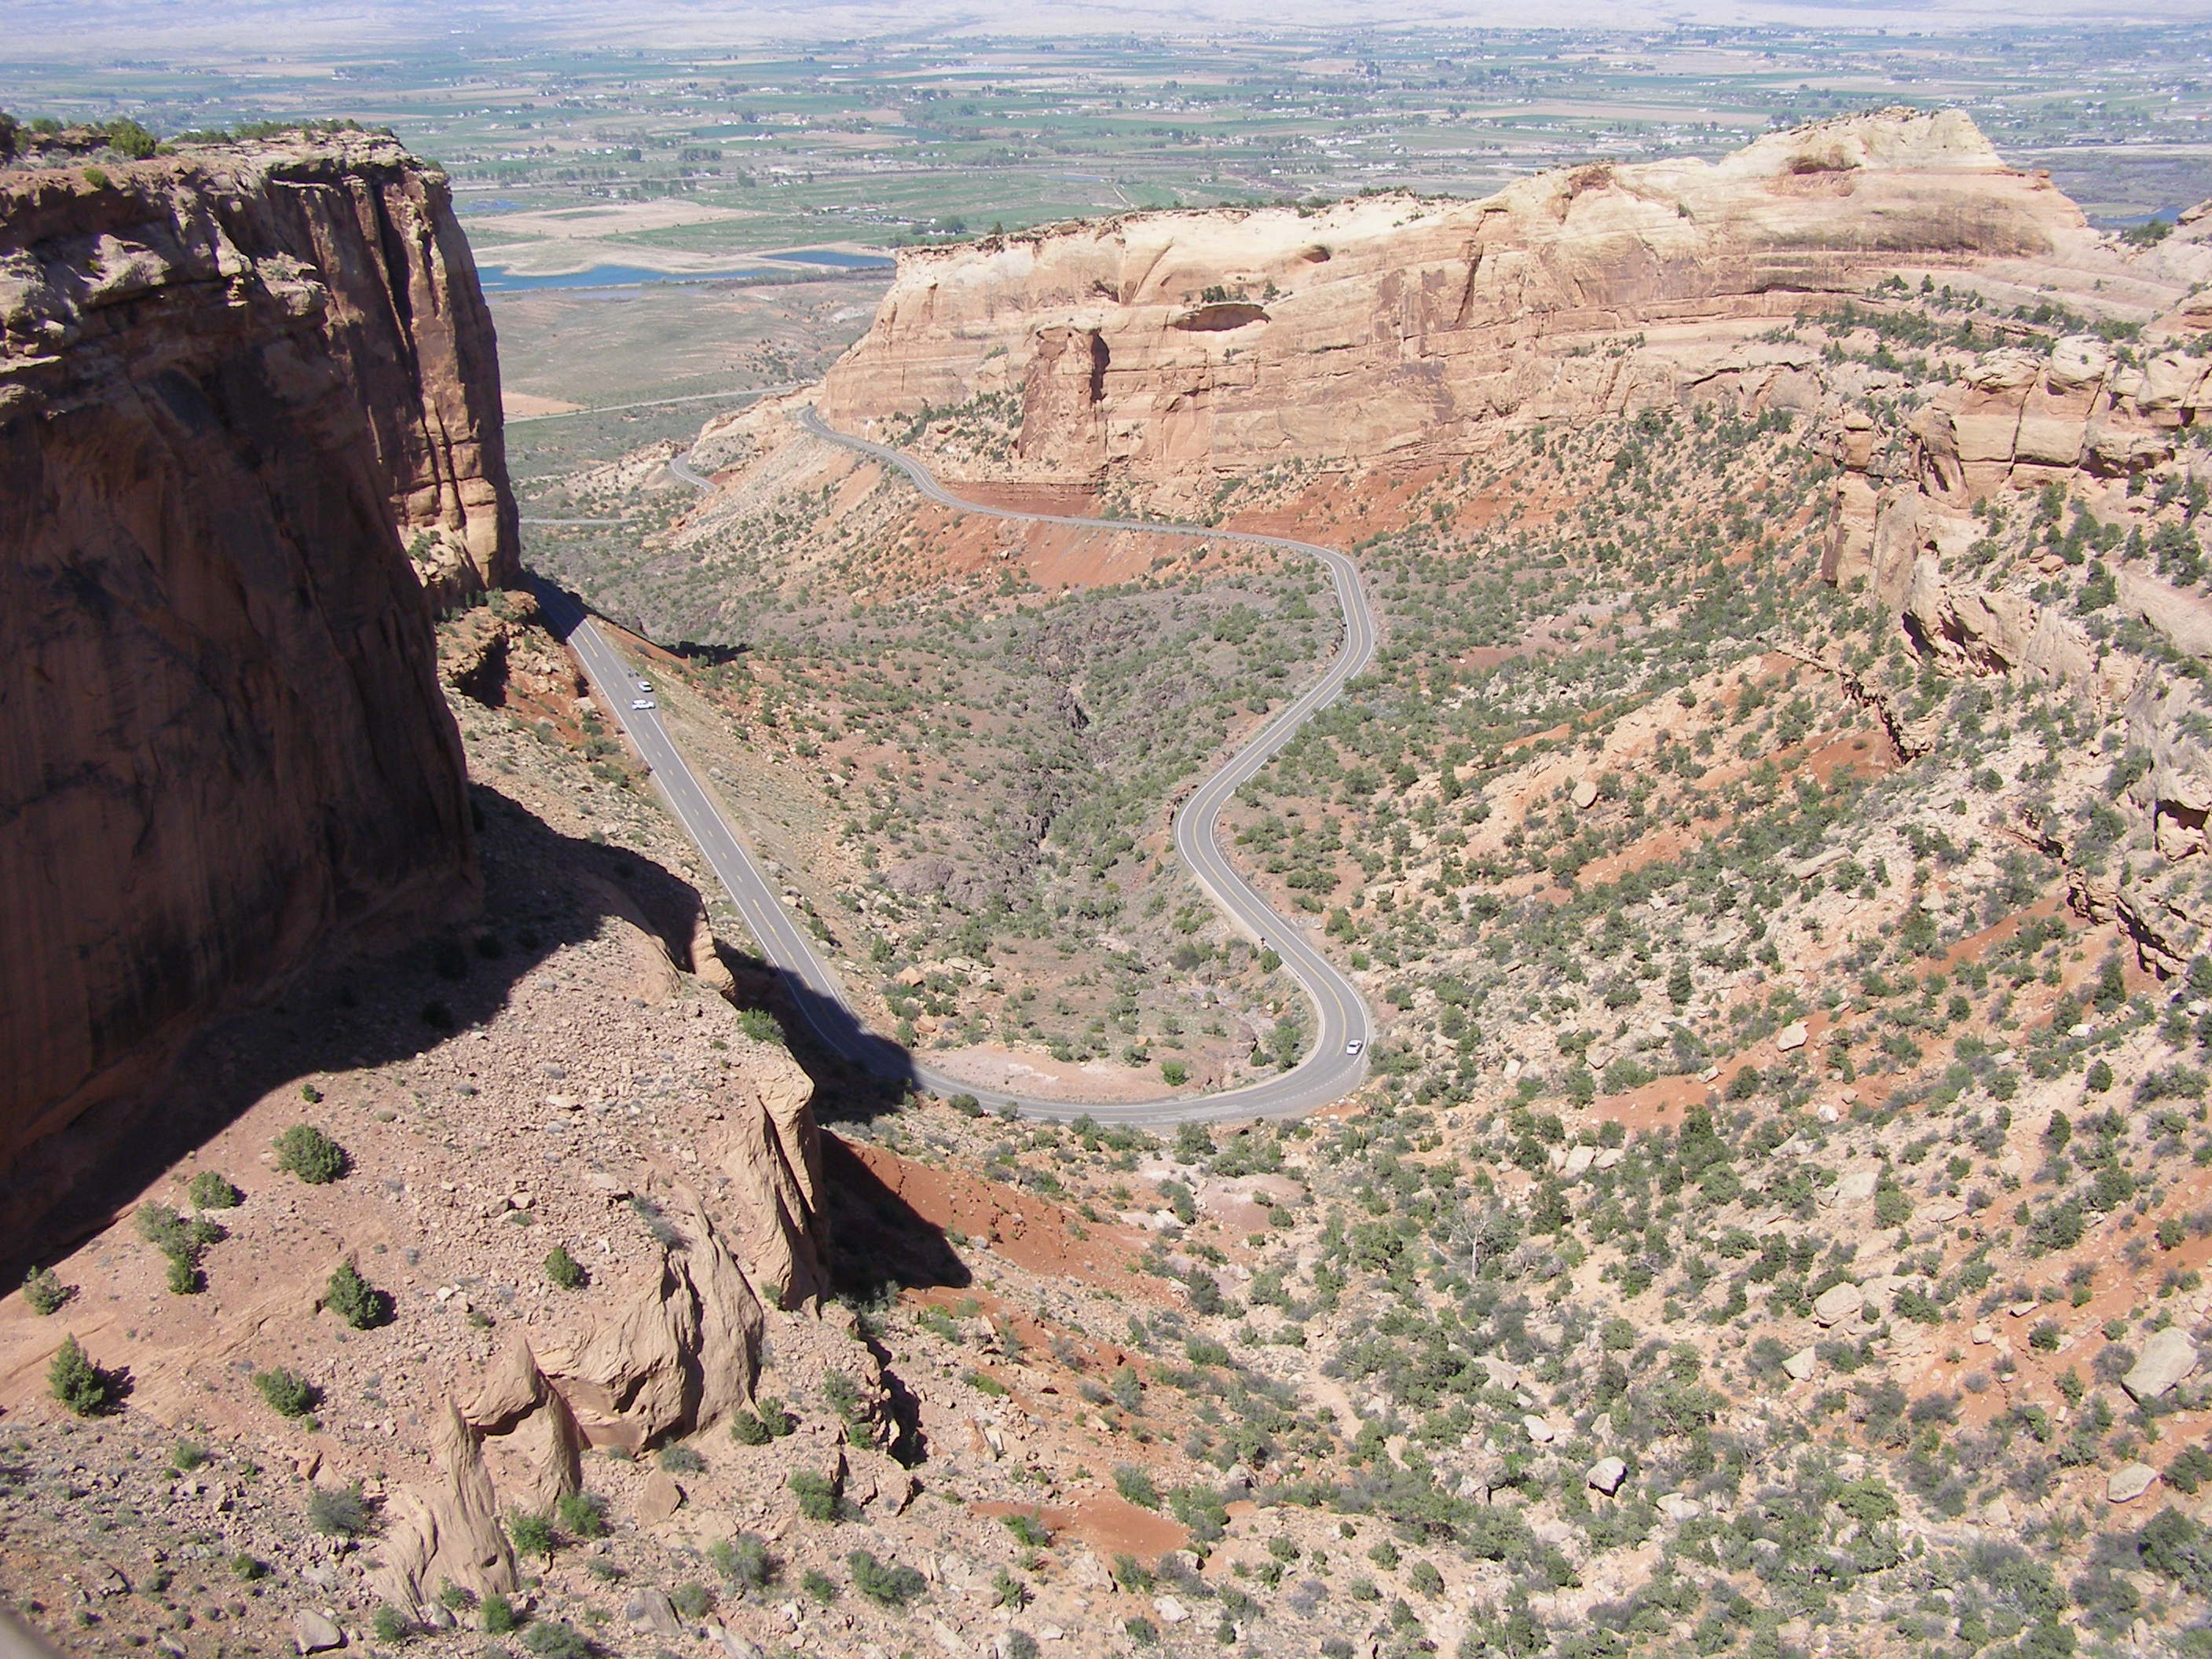 Looking down from canyon rim at a portion of the historic Rim Rock Drive